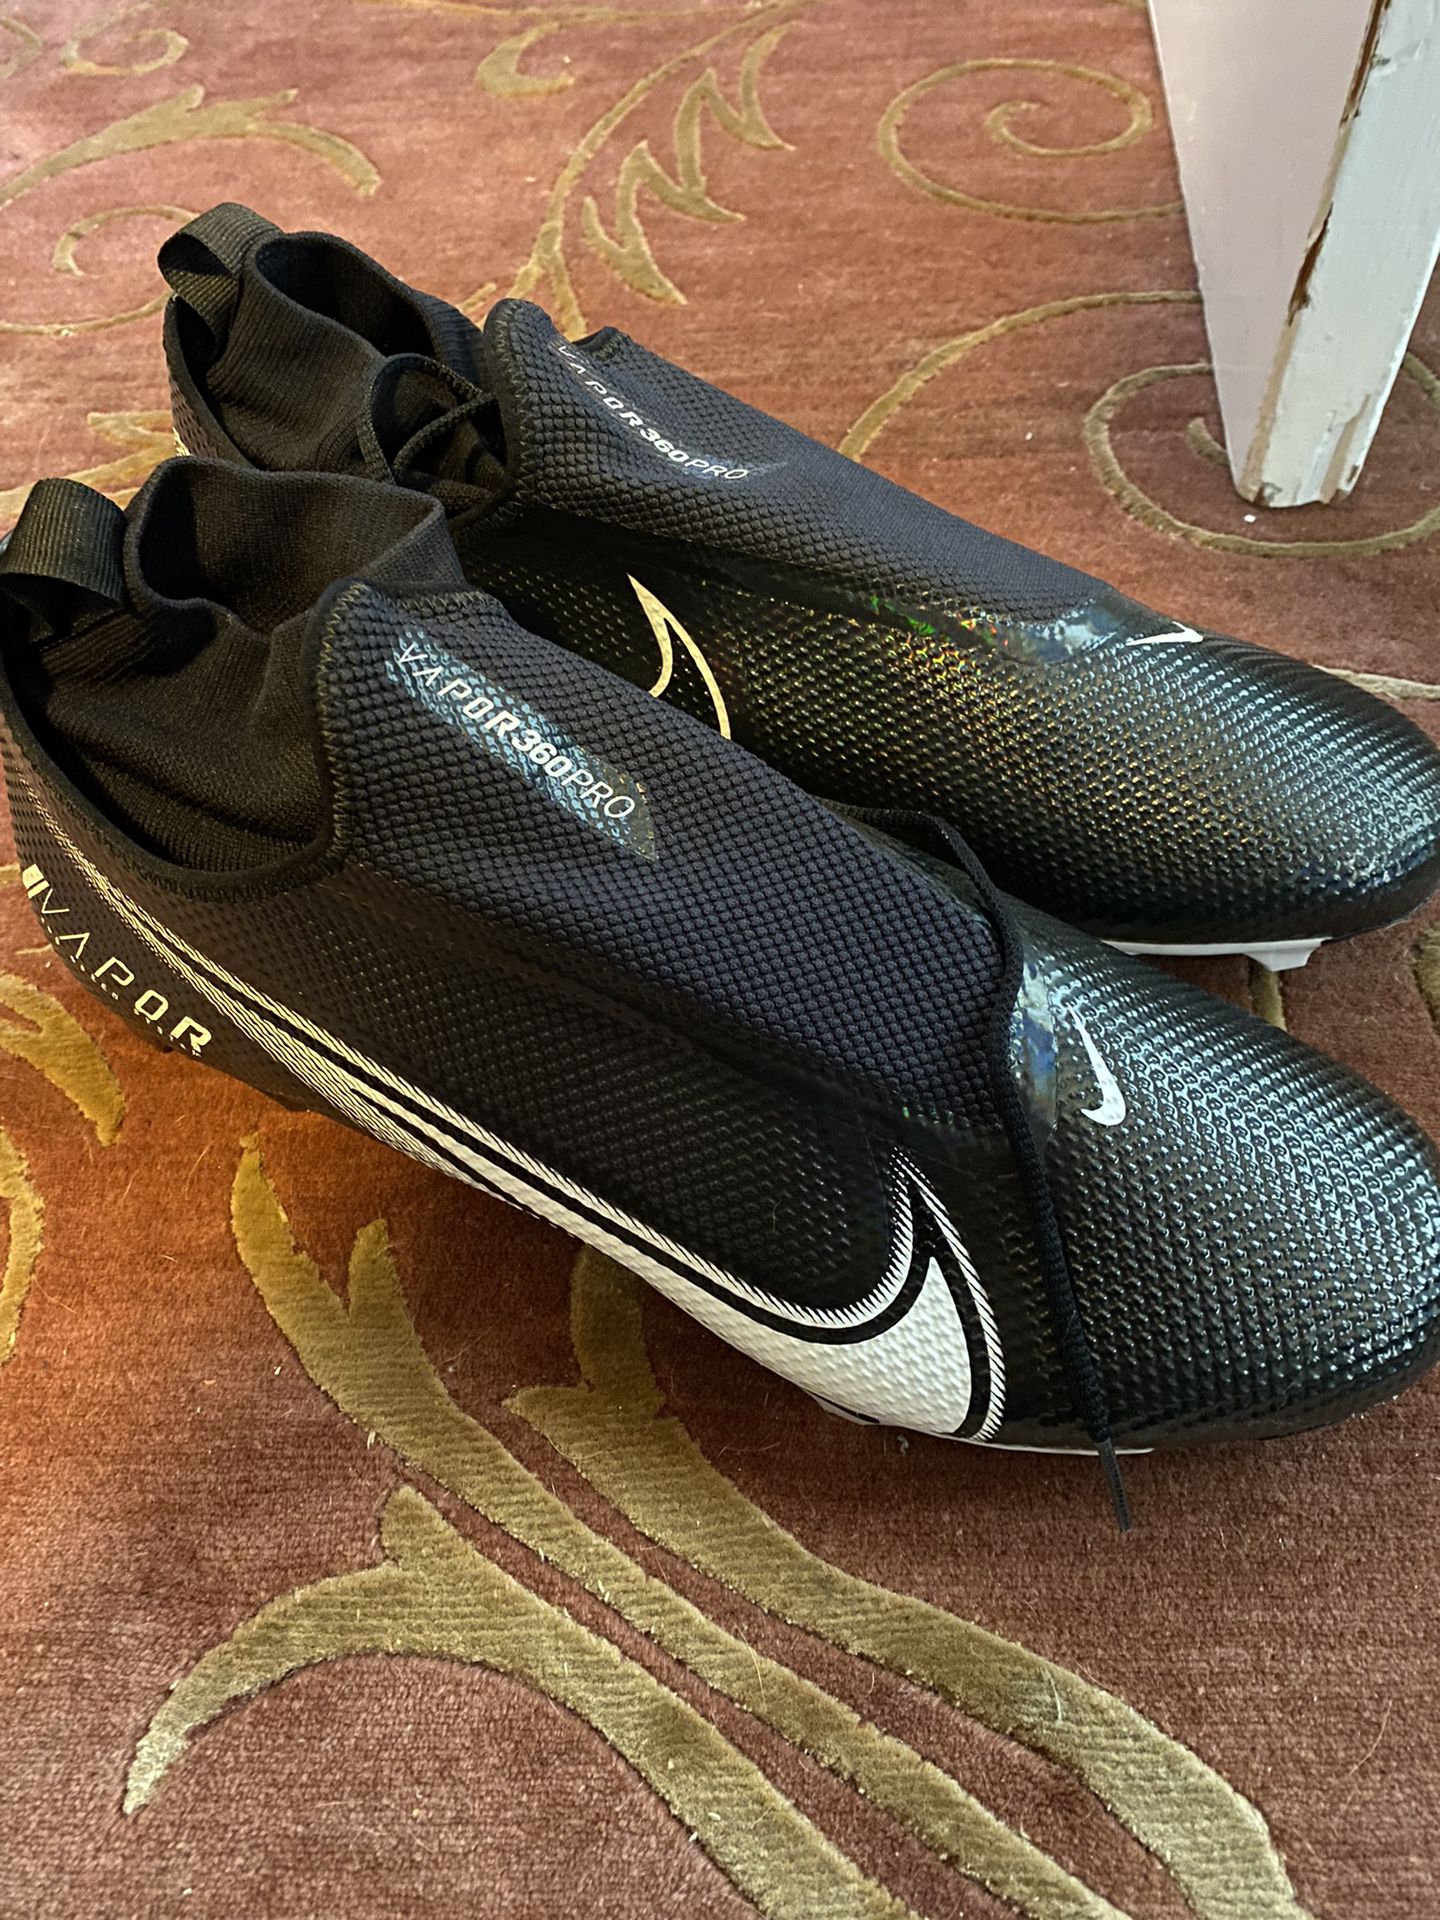 Nike American Football Cleats New Without Box